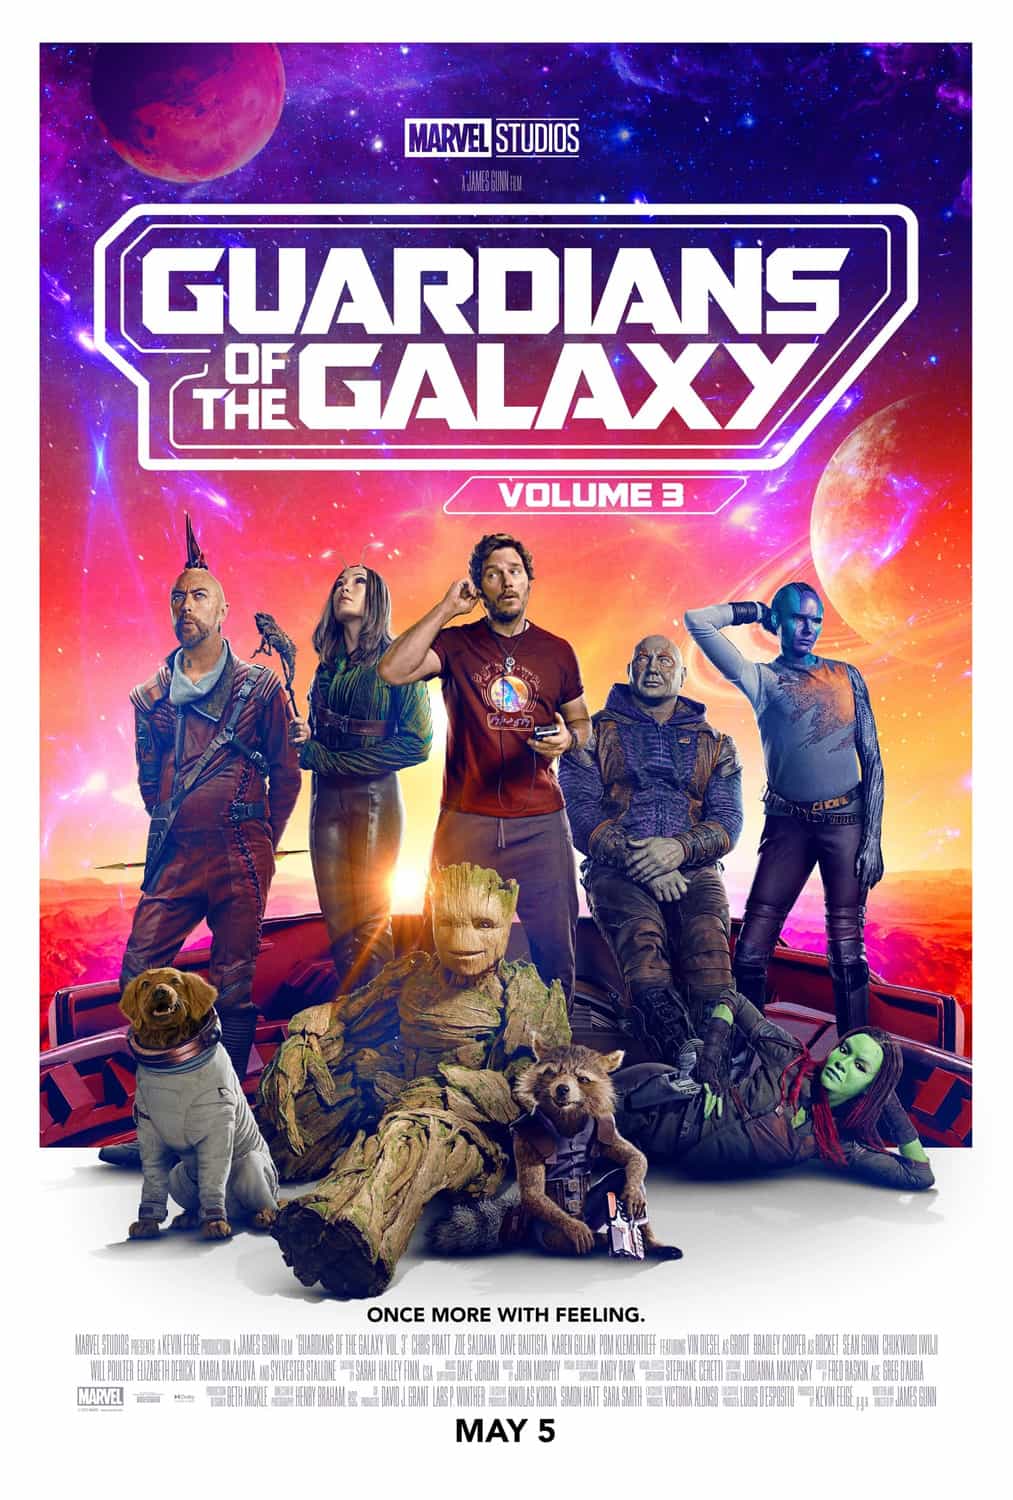 Check out the new trailer and poster which has been released for Guardians of the Galaxy Vol 3 which stars Chris Pratt - movie UK release date 5th May 2023